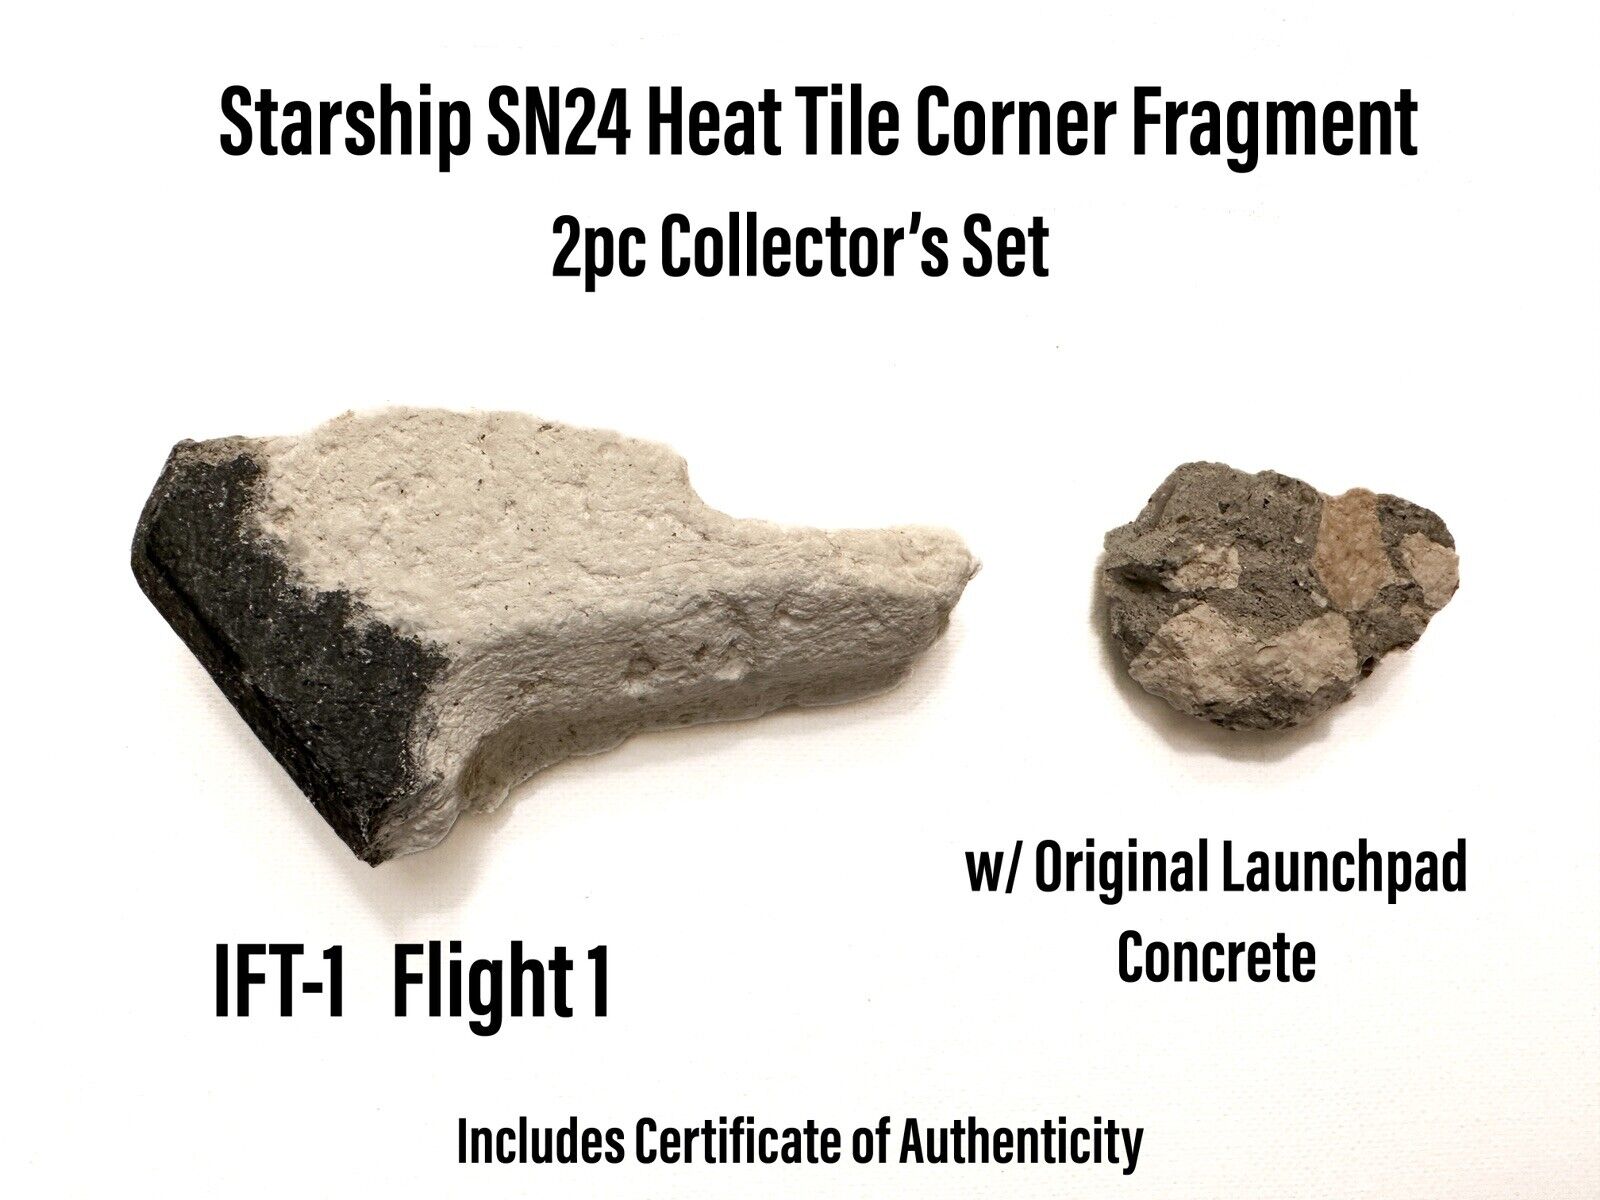 SpaceX Starship SN24 S24 Heat Shield Tile & Launchpad - 2 Piece Collector’s Set